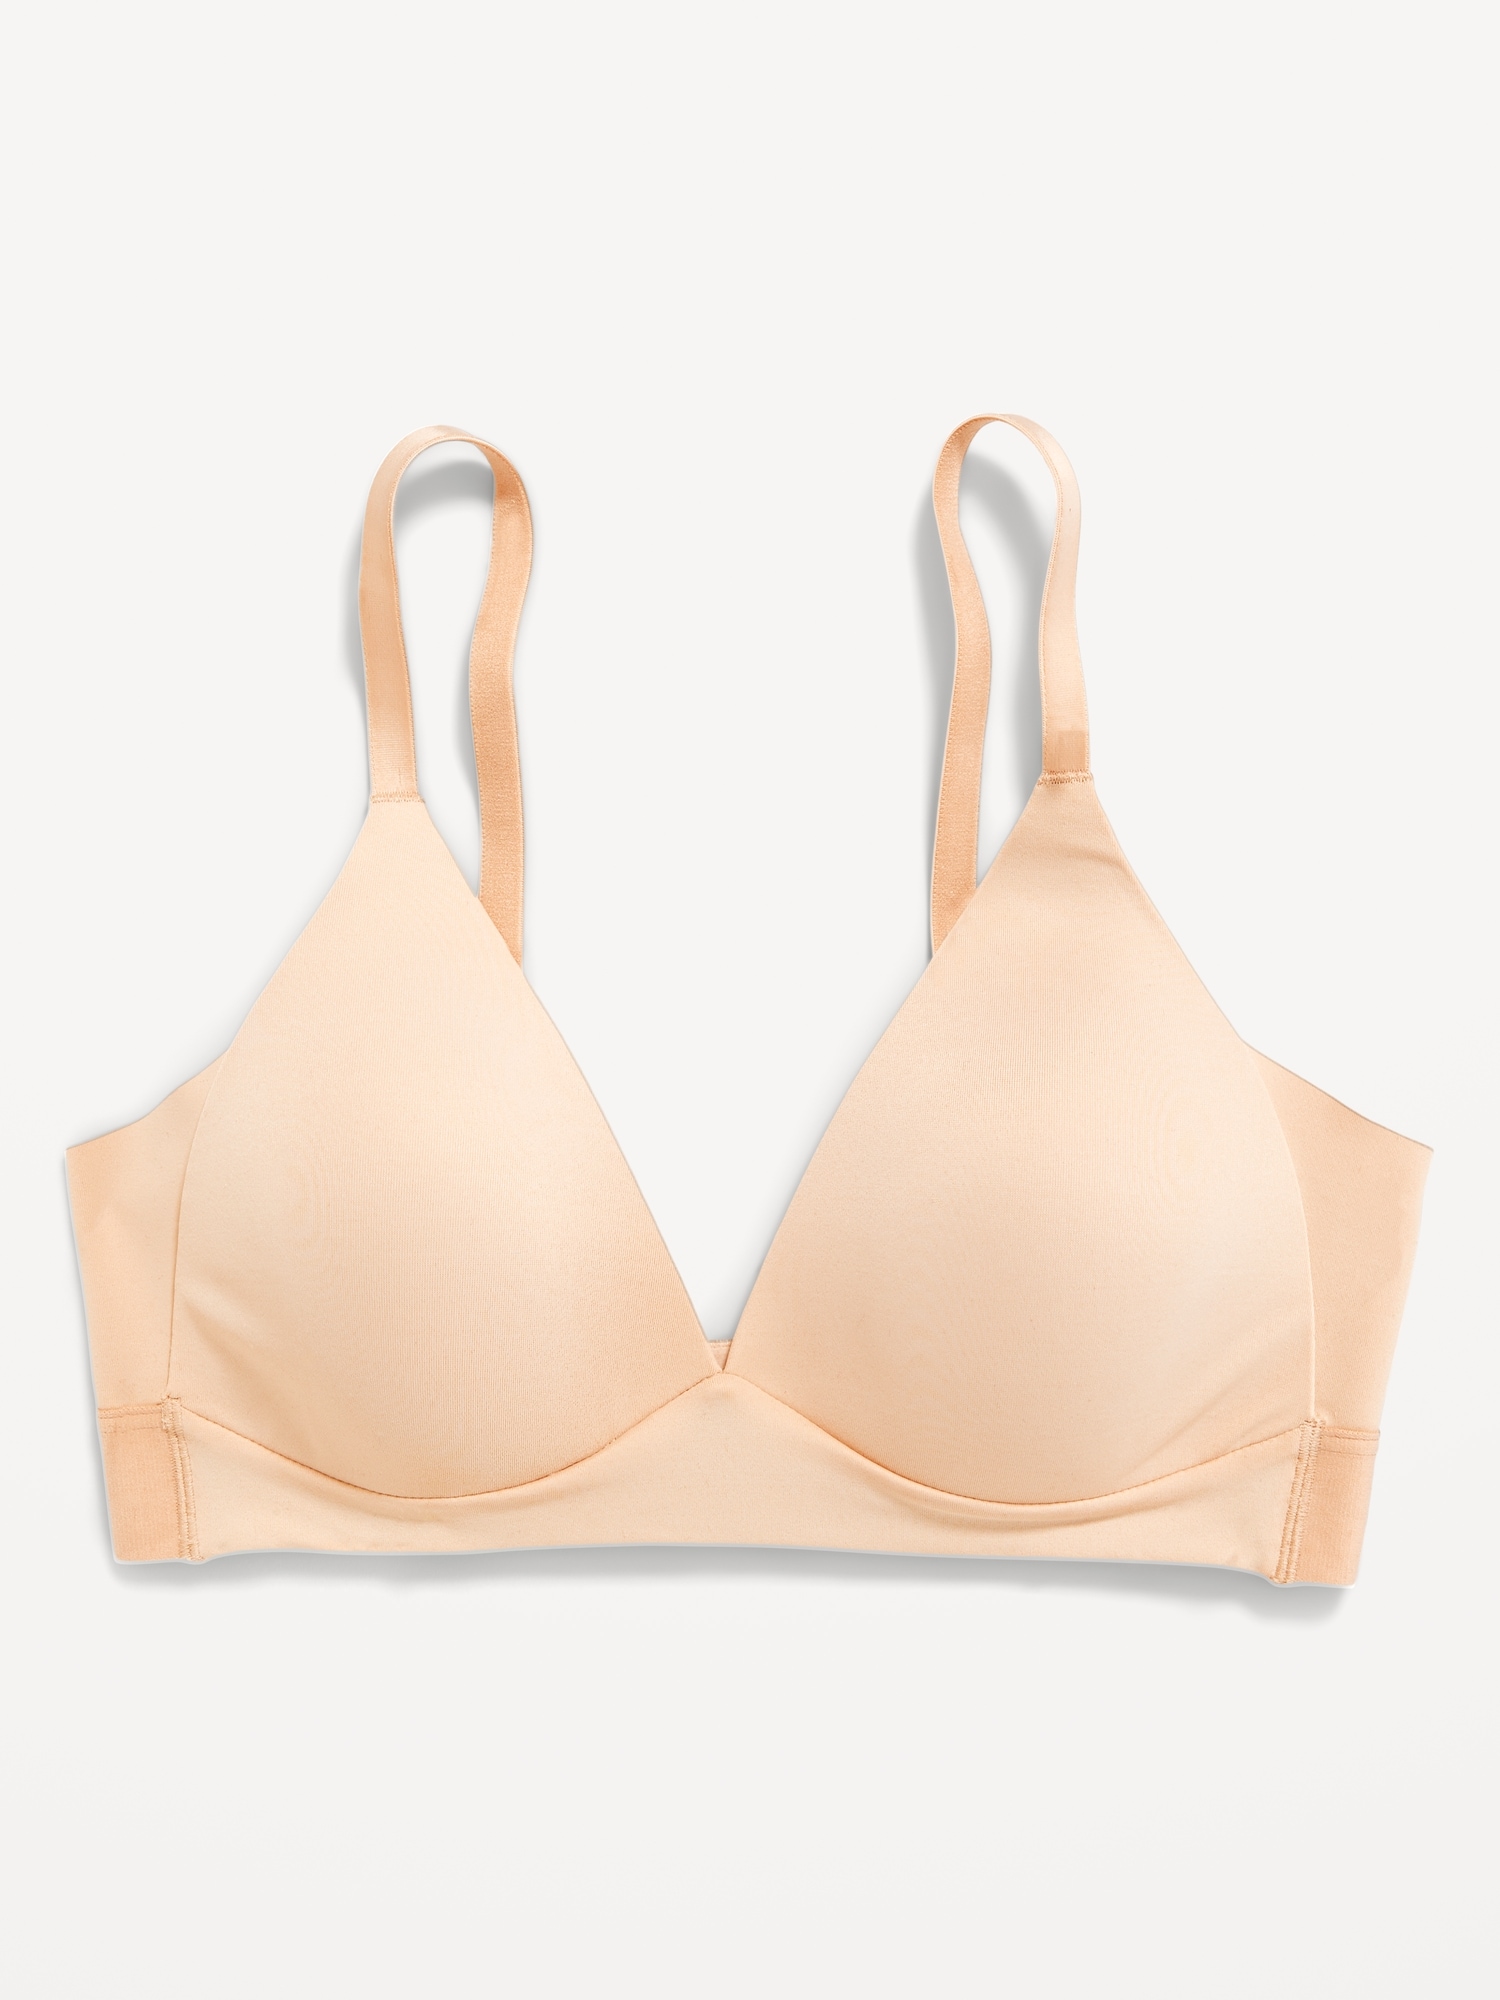 I Own Over a Dozen Bras, But This New Wireless Design Is the Most Comfy,  Supportive Style I've Ever Worn